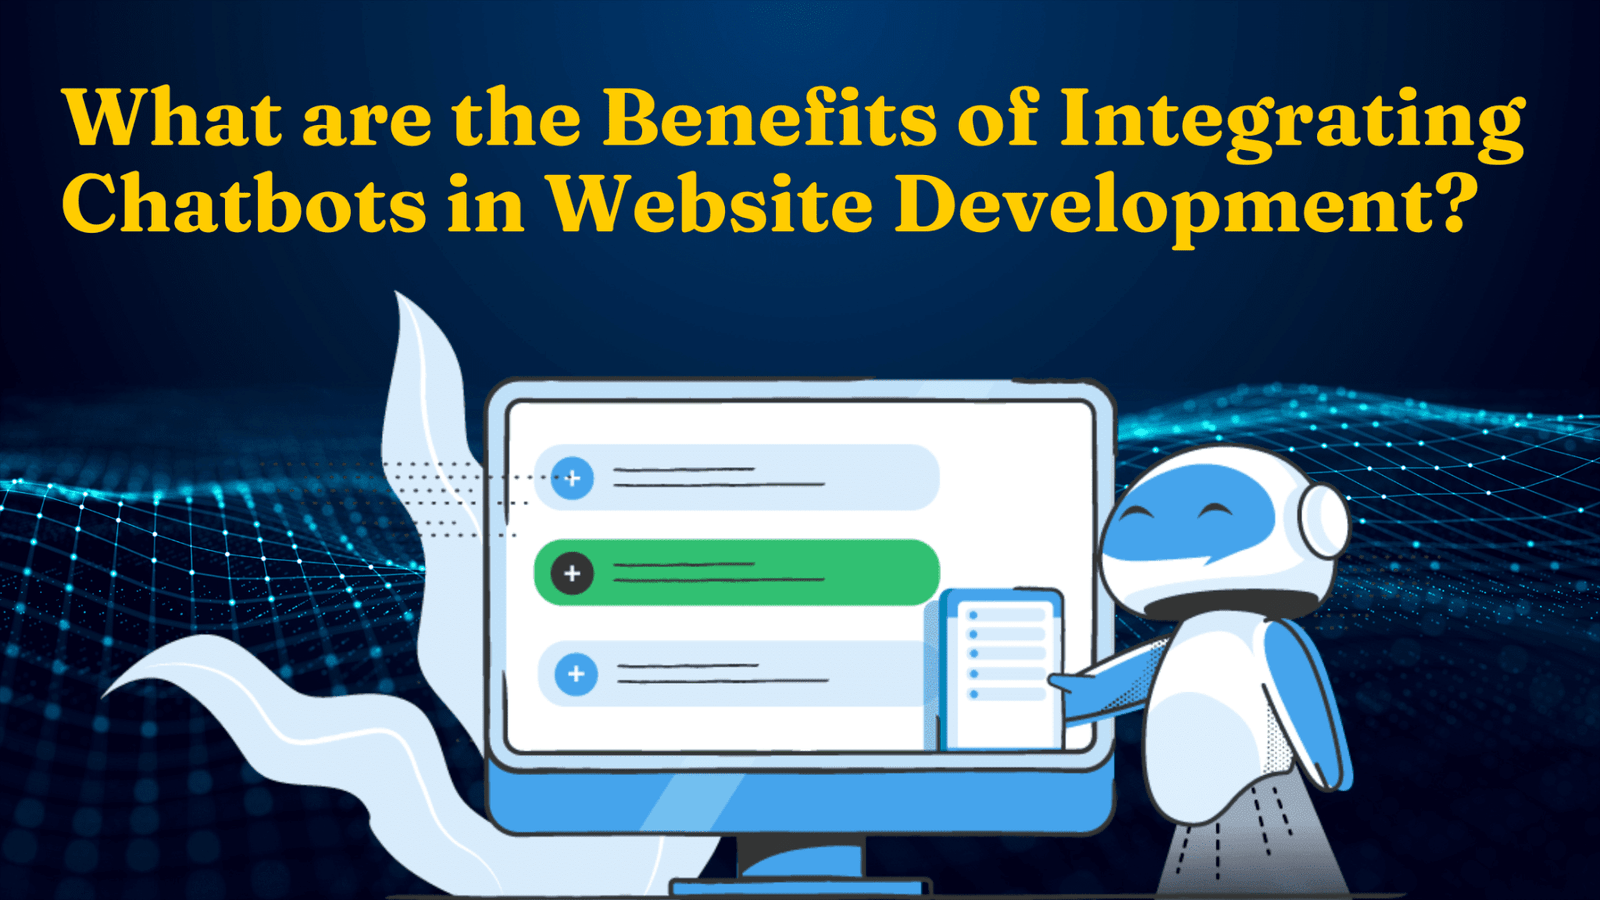 Integrate the Chatbots to Websites to Reap the Benefits